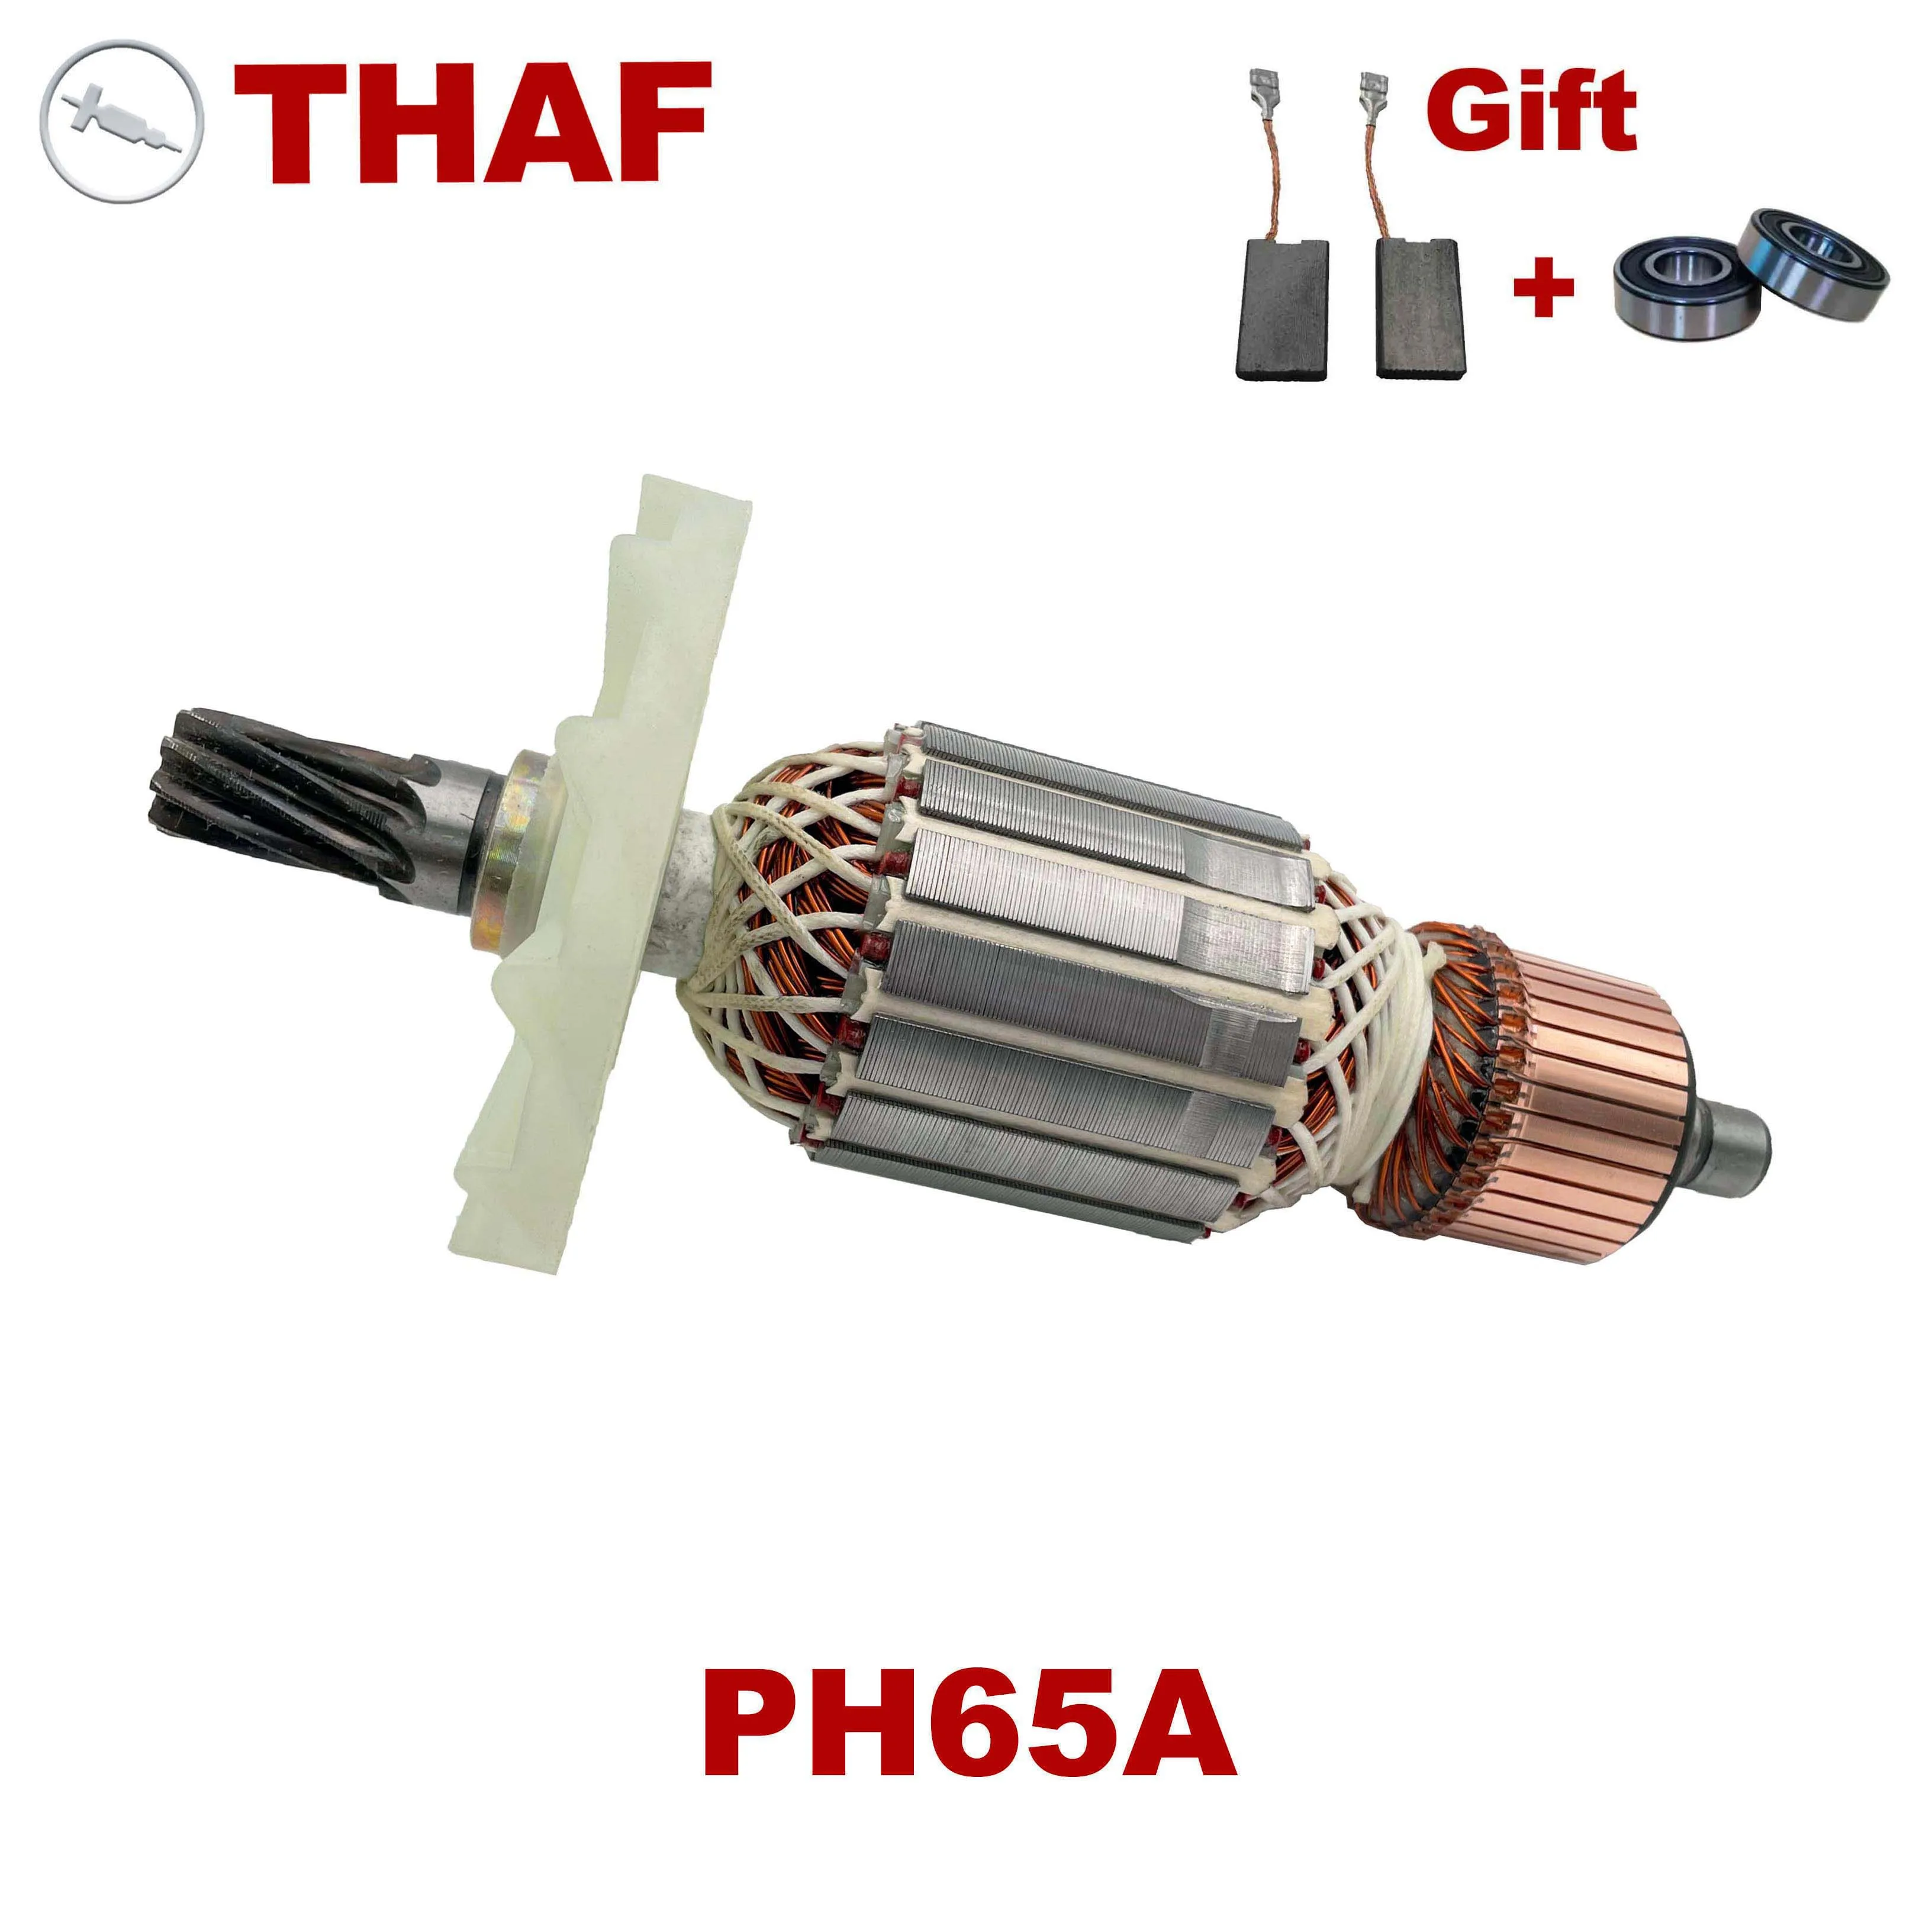 

Free Bearing & Carbon Brush! AC220-240V Armature Rotor Anchor Stator Replacement for HITACHI Demolition Hammer PH65A PH85A PH75A